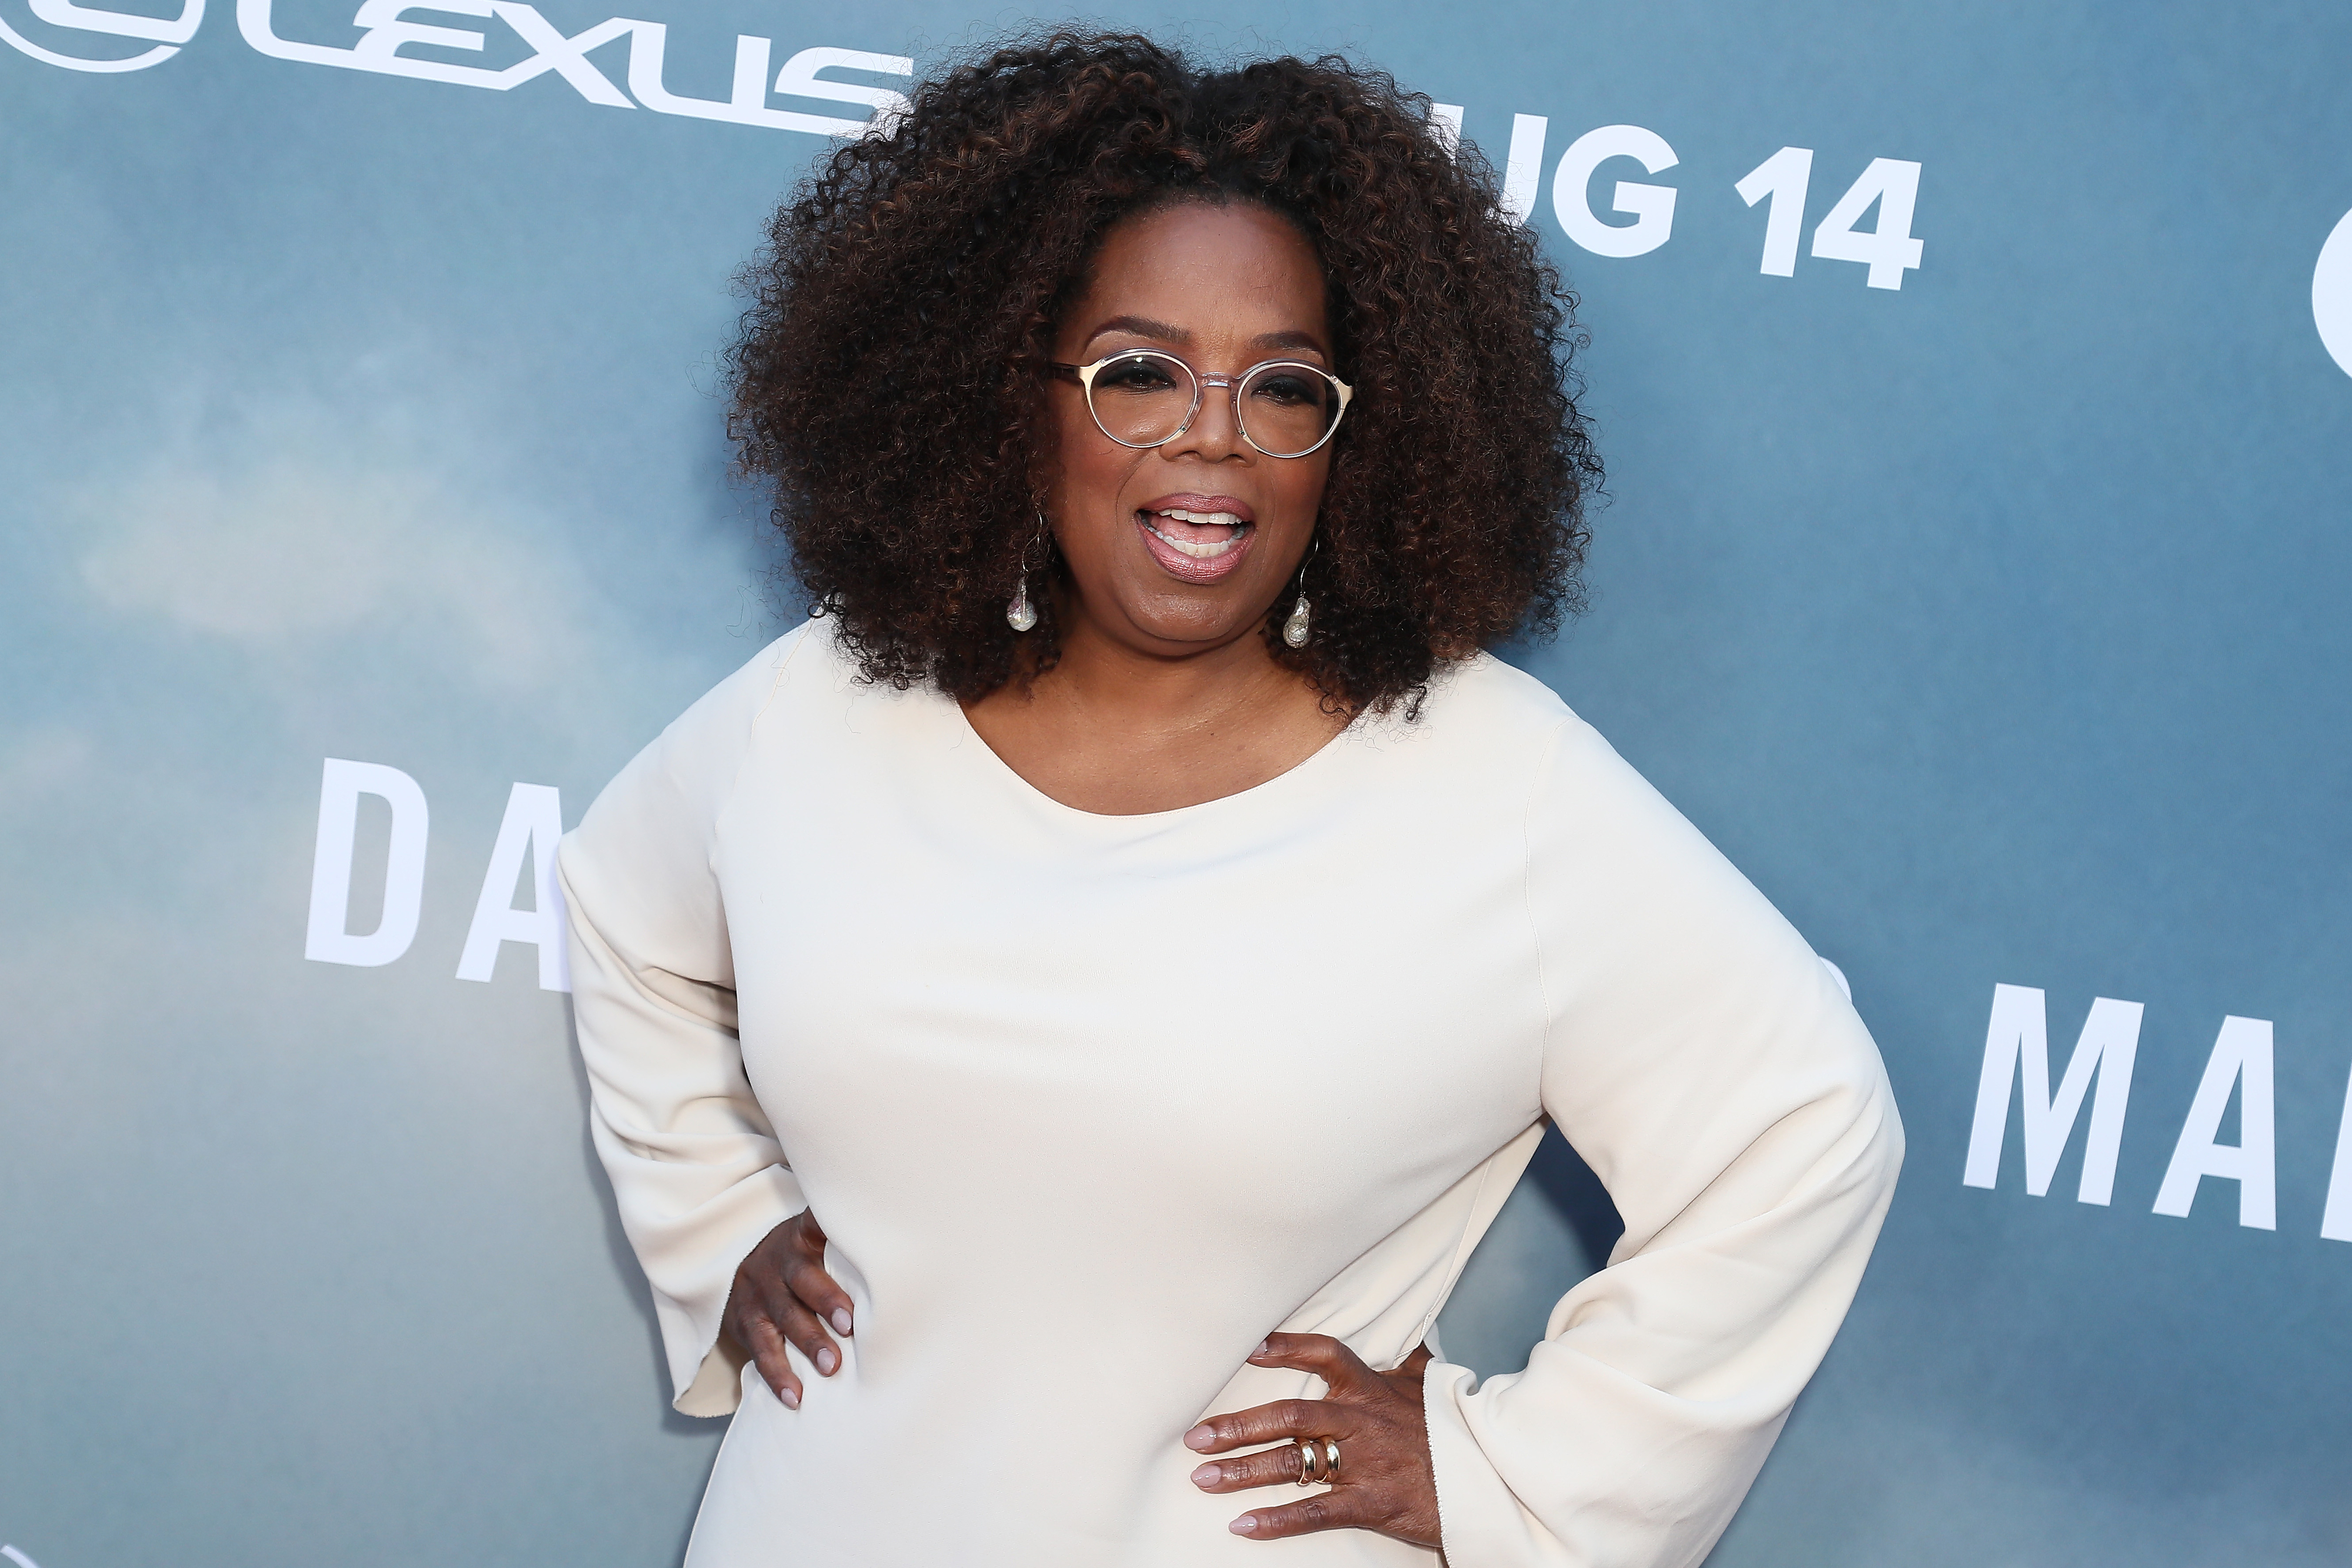 Close-up of Oprah at a media event